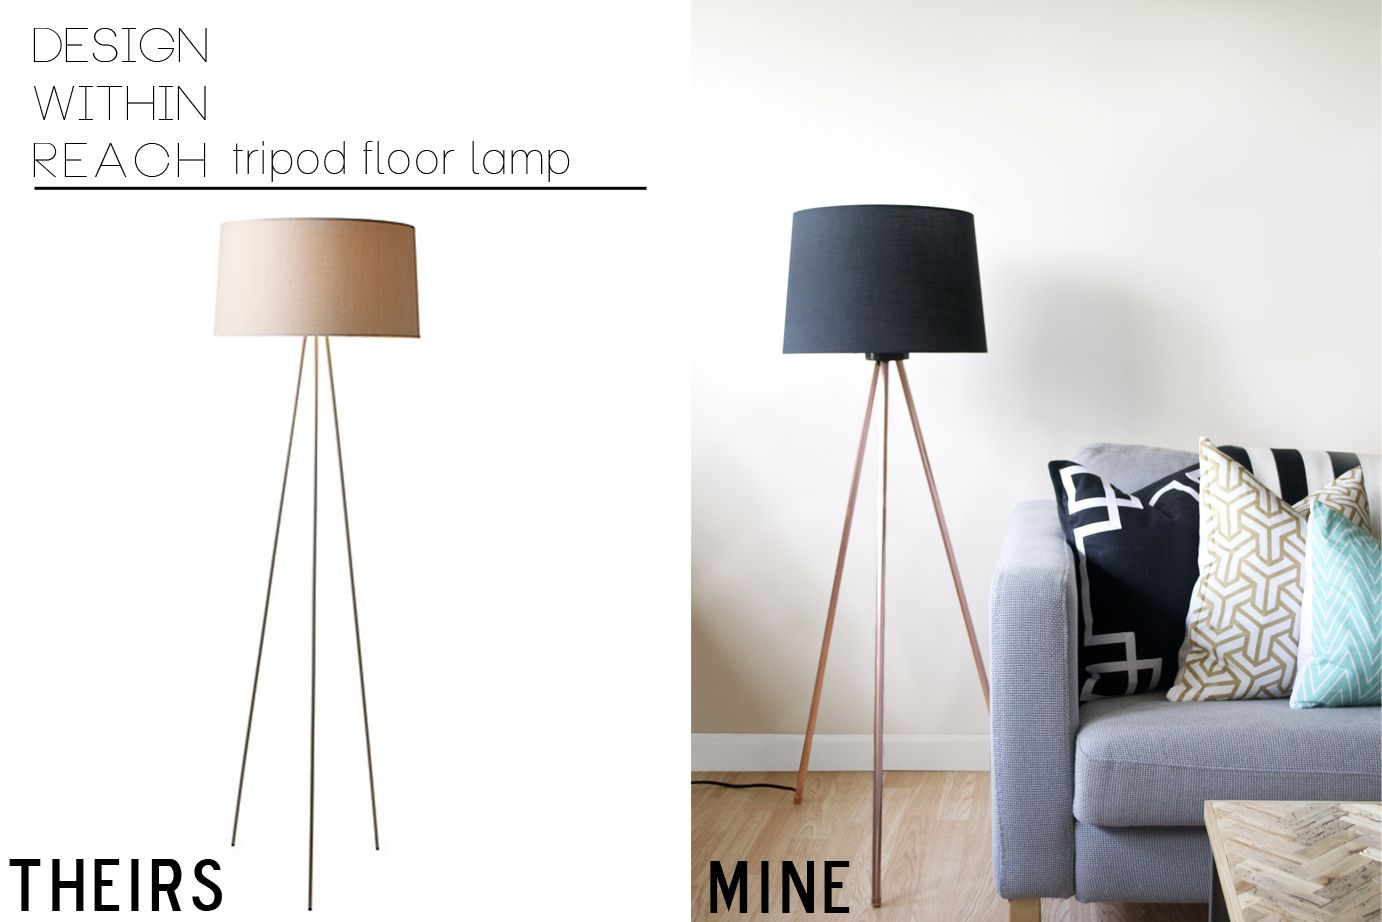 Diy Tripod Lamp Diy Floor Lamp Diy Tripod Floor Lamp pertaining to size 1382 X 922